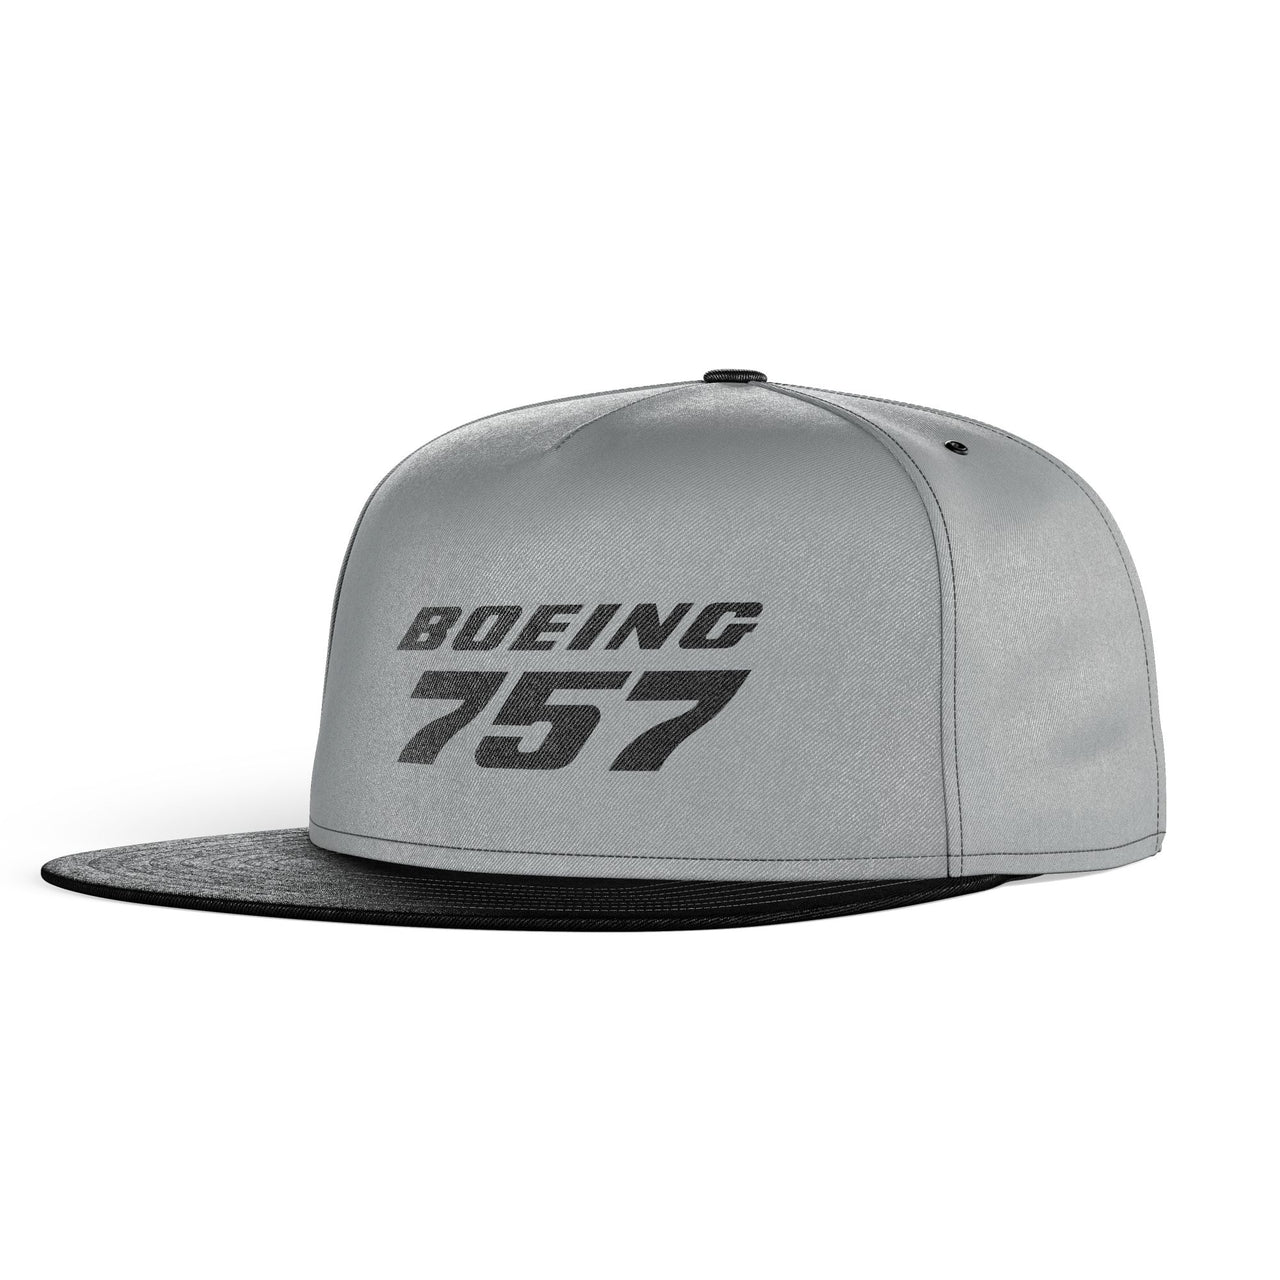 Boeing 757 & Text Designed Snapback Caps & Hats